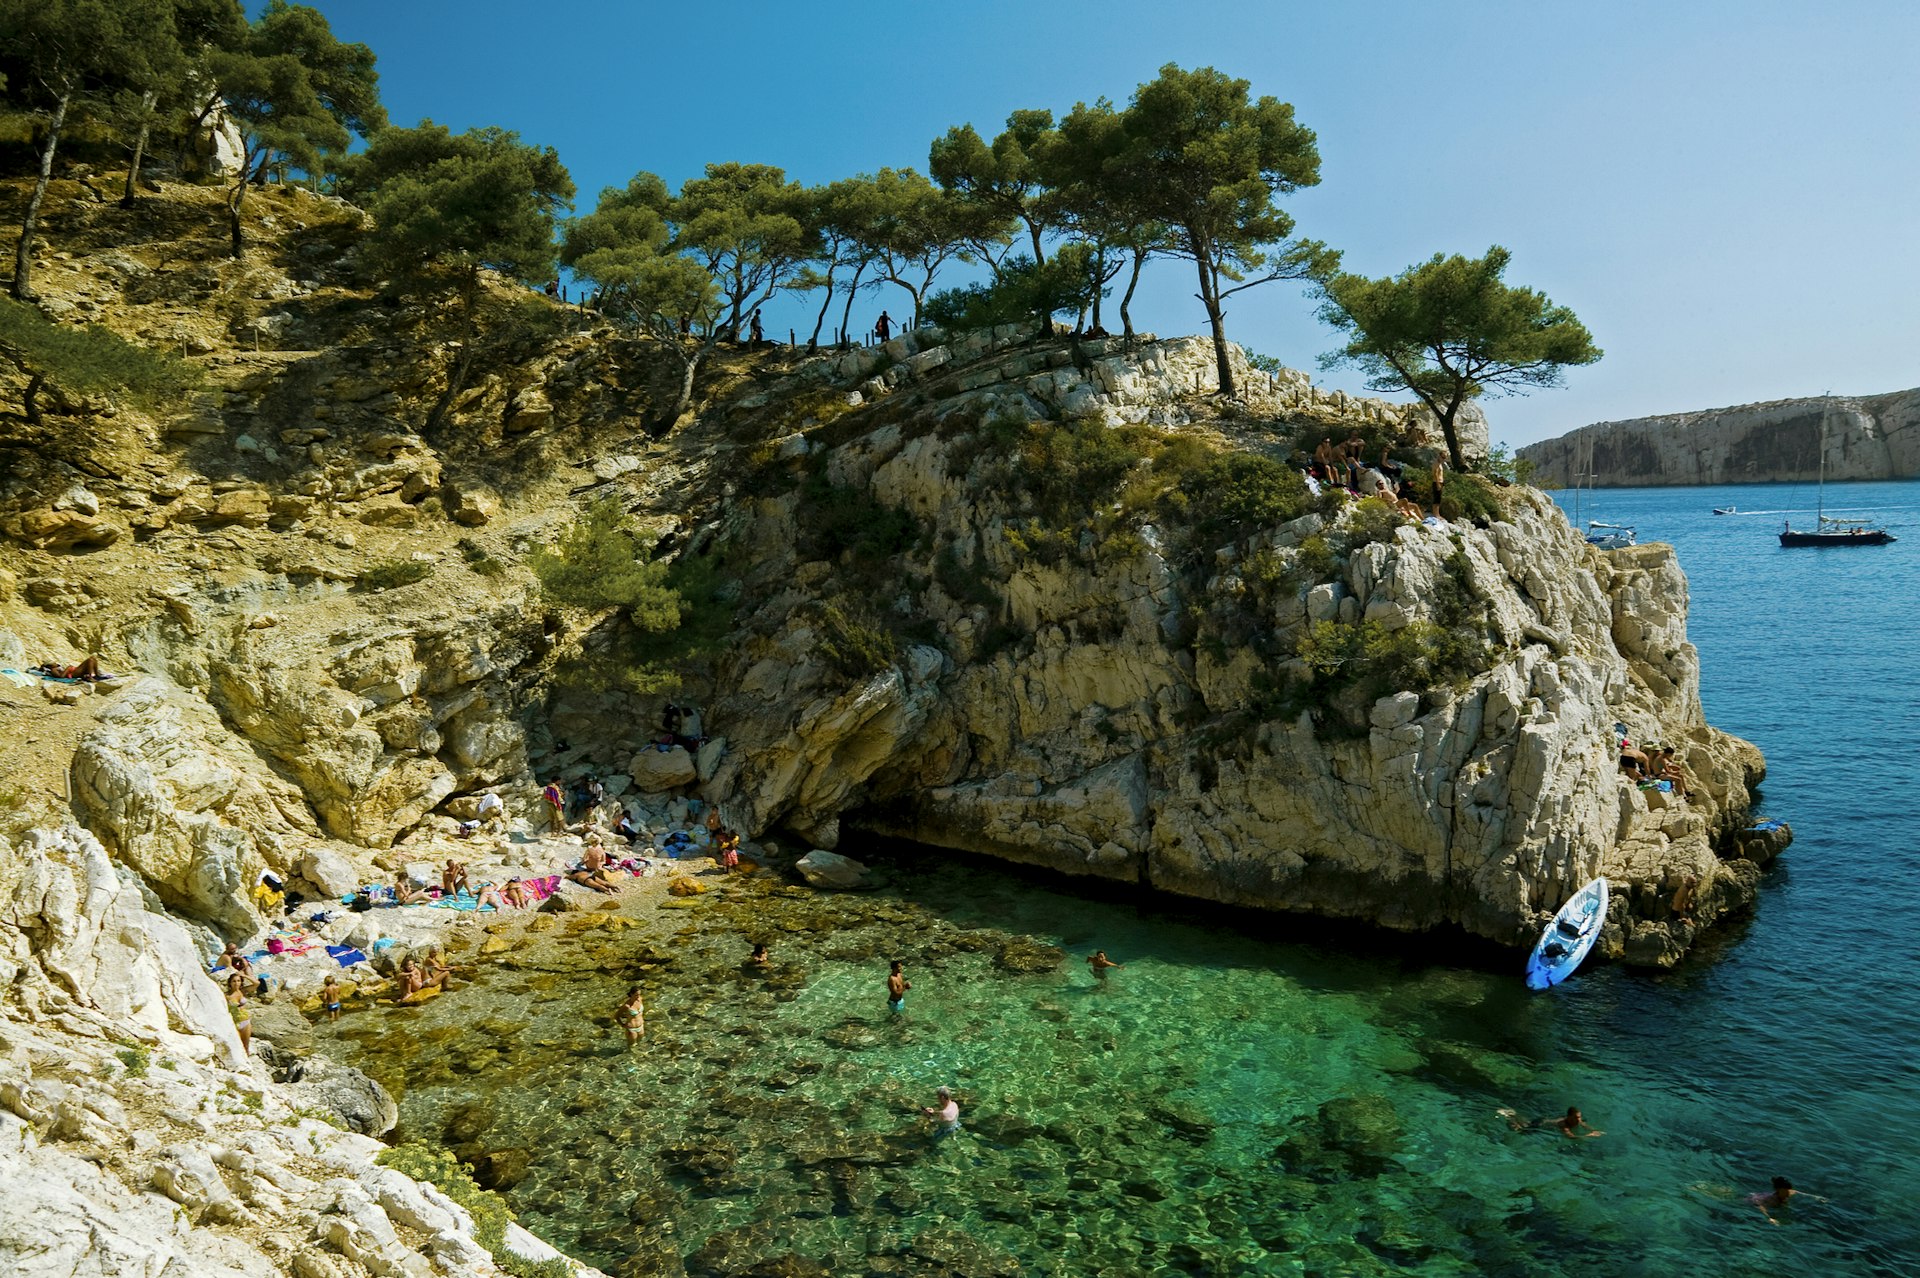 A small cove at the foot of rocky sea cliffs with people sunbathing and playing in the water